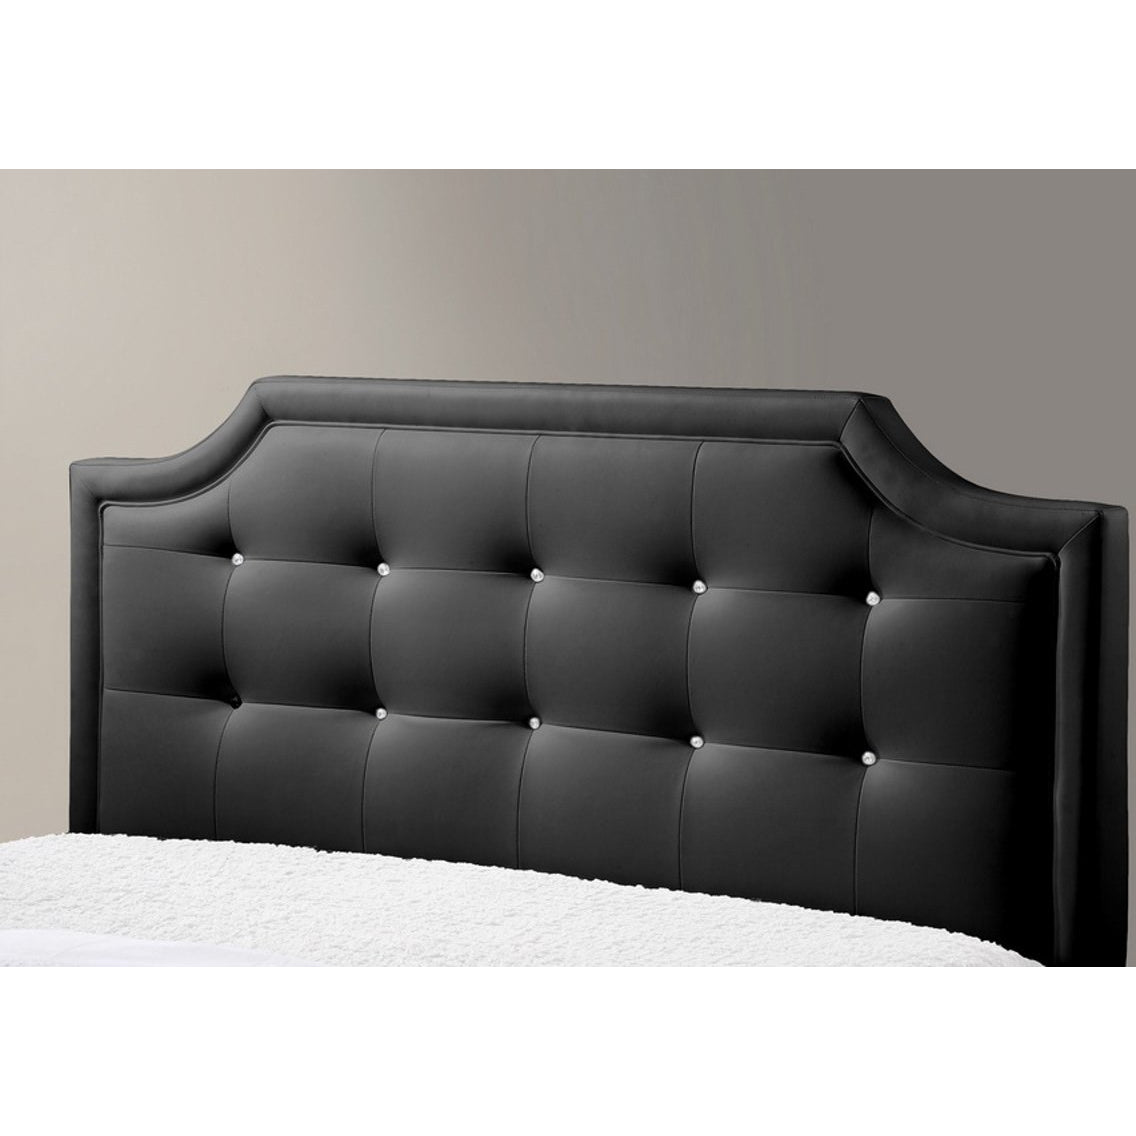 Baxton Studio Carlotta Black Modern Bed with Upholstered Headboard - Queen Size Baxton Studio-beds-Minimal And Modern - 2